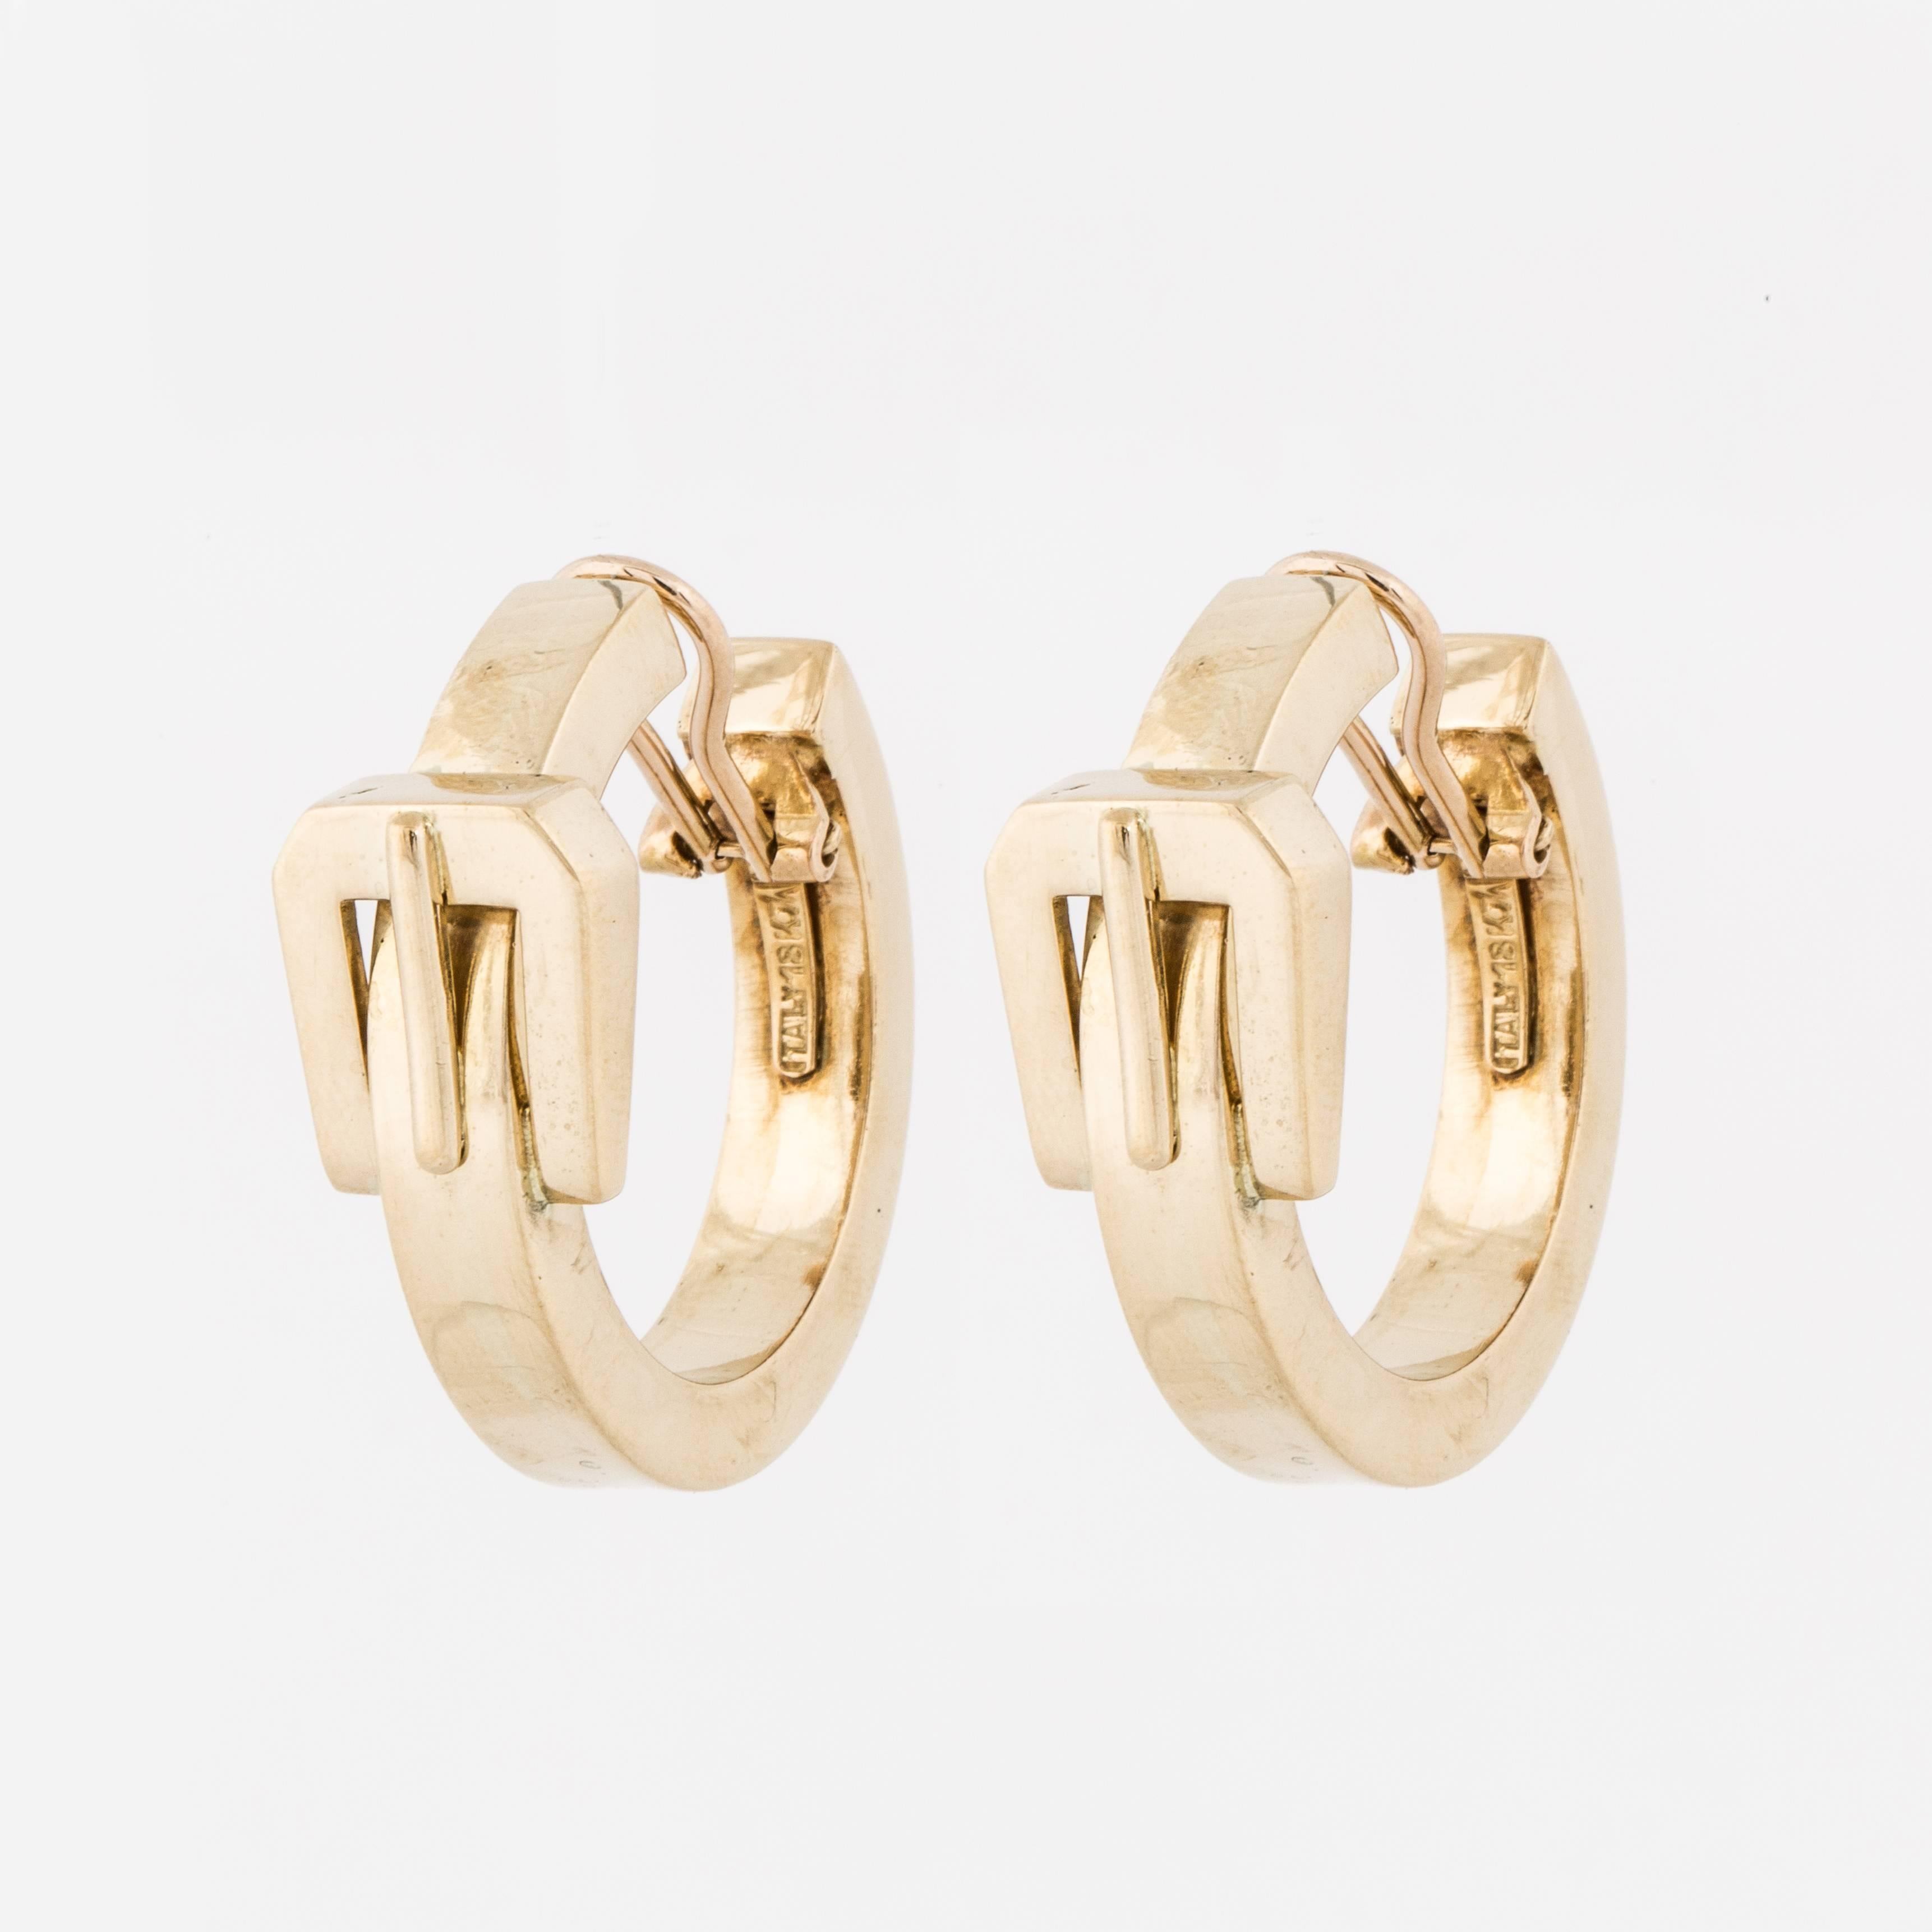 18K yellow gold high polish hoop earrings with a belt buckle motif at the top.  Length of earring is 1 1/2 inches, width at the buckle is 1/2 inch and the hoop measures 1/4 inch wide.   